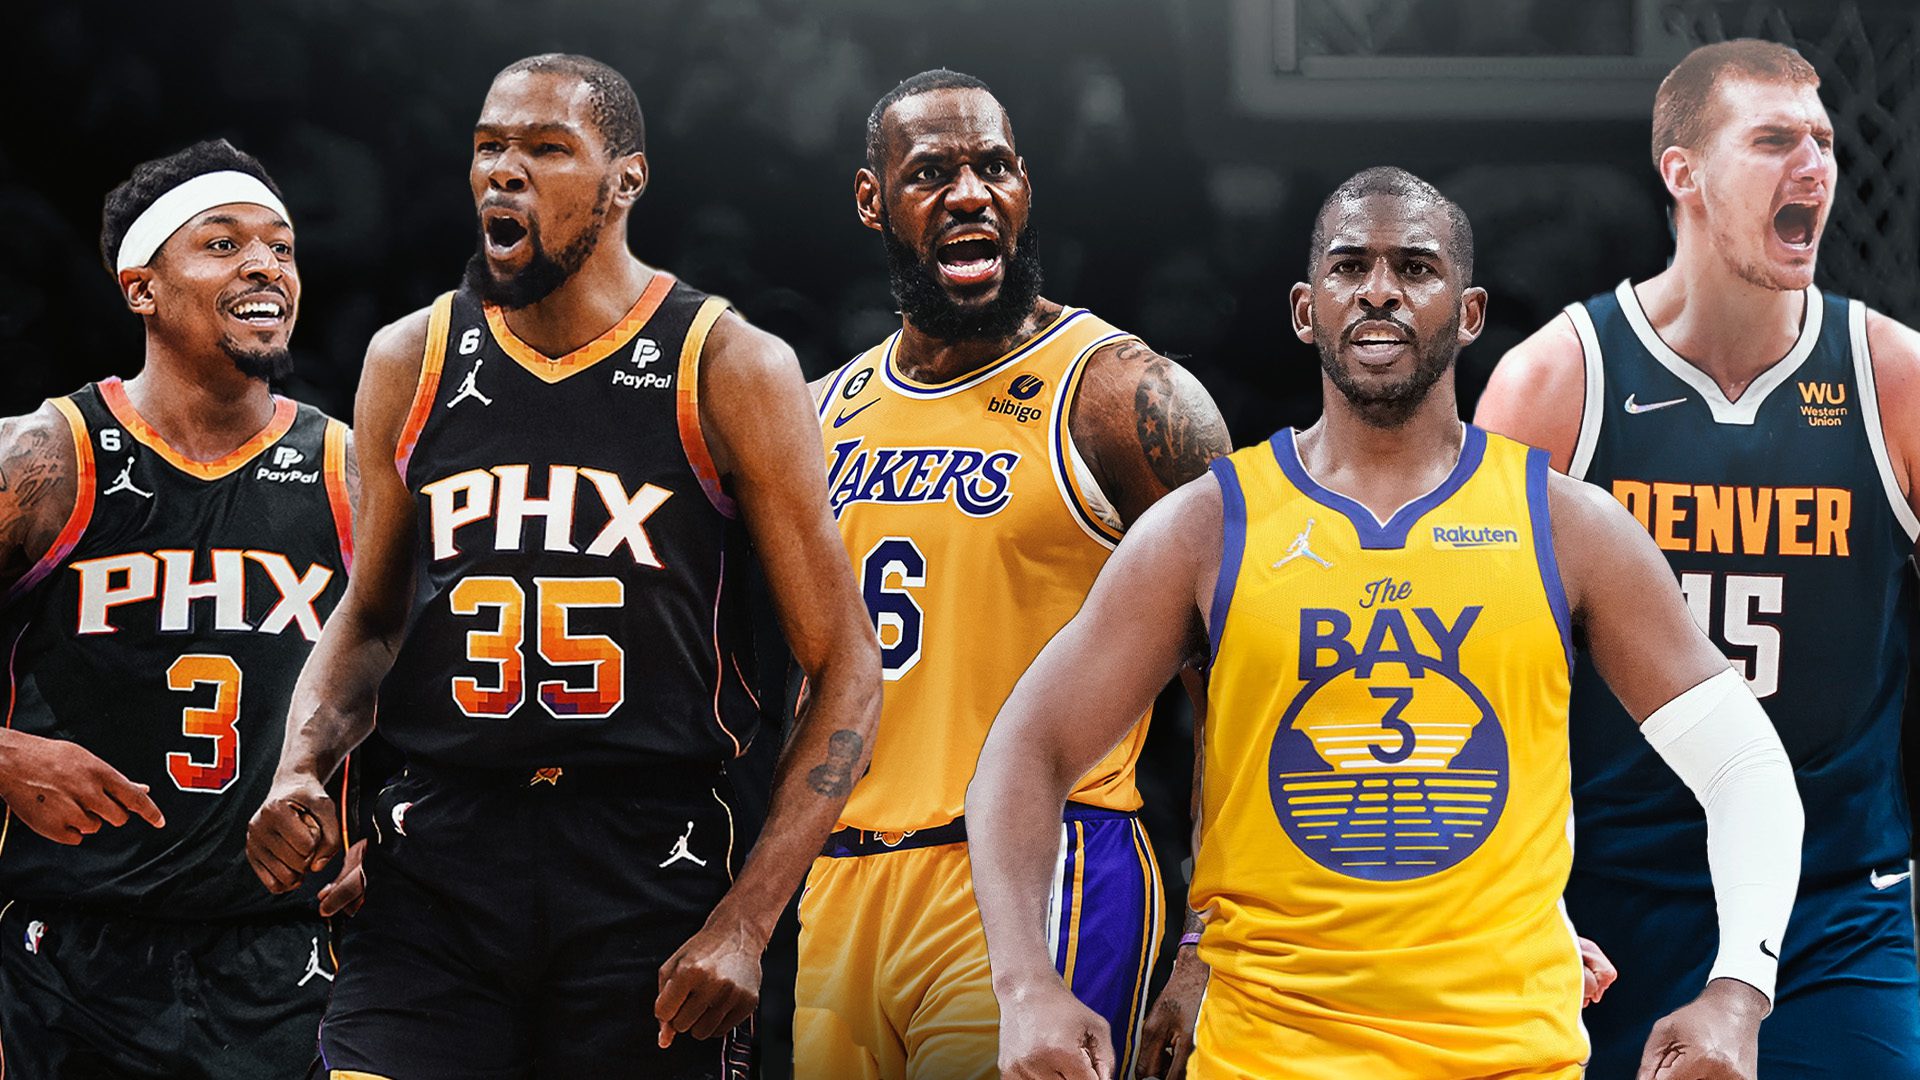 The Best NBA Games to Watch This Season, Full Schedule Details